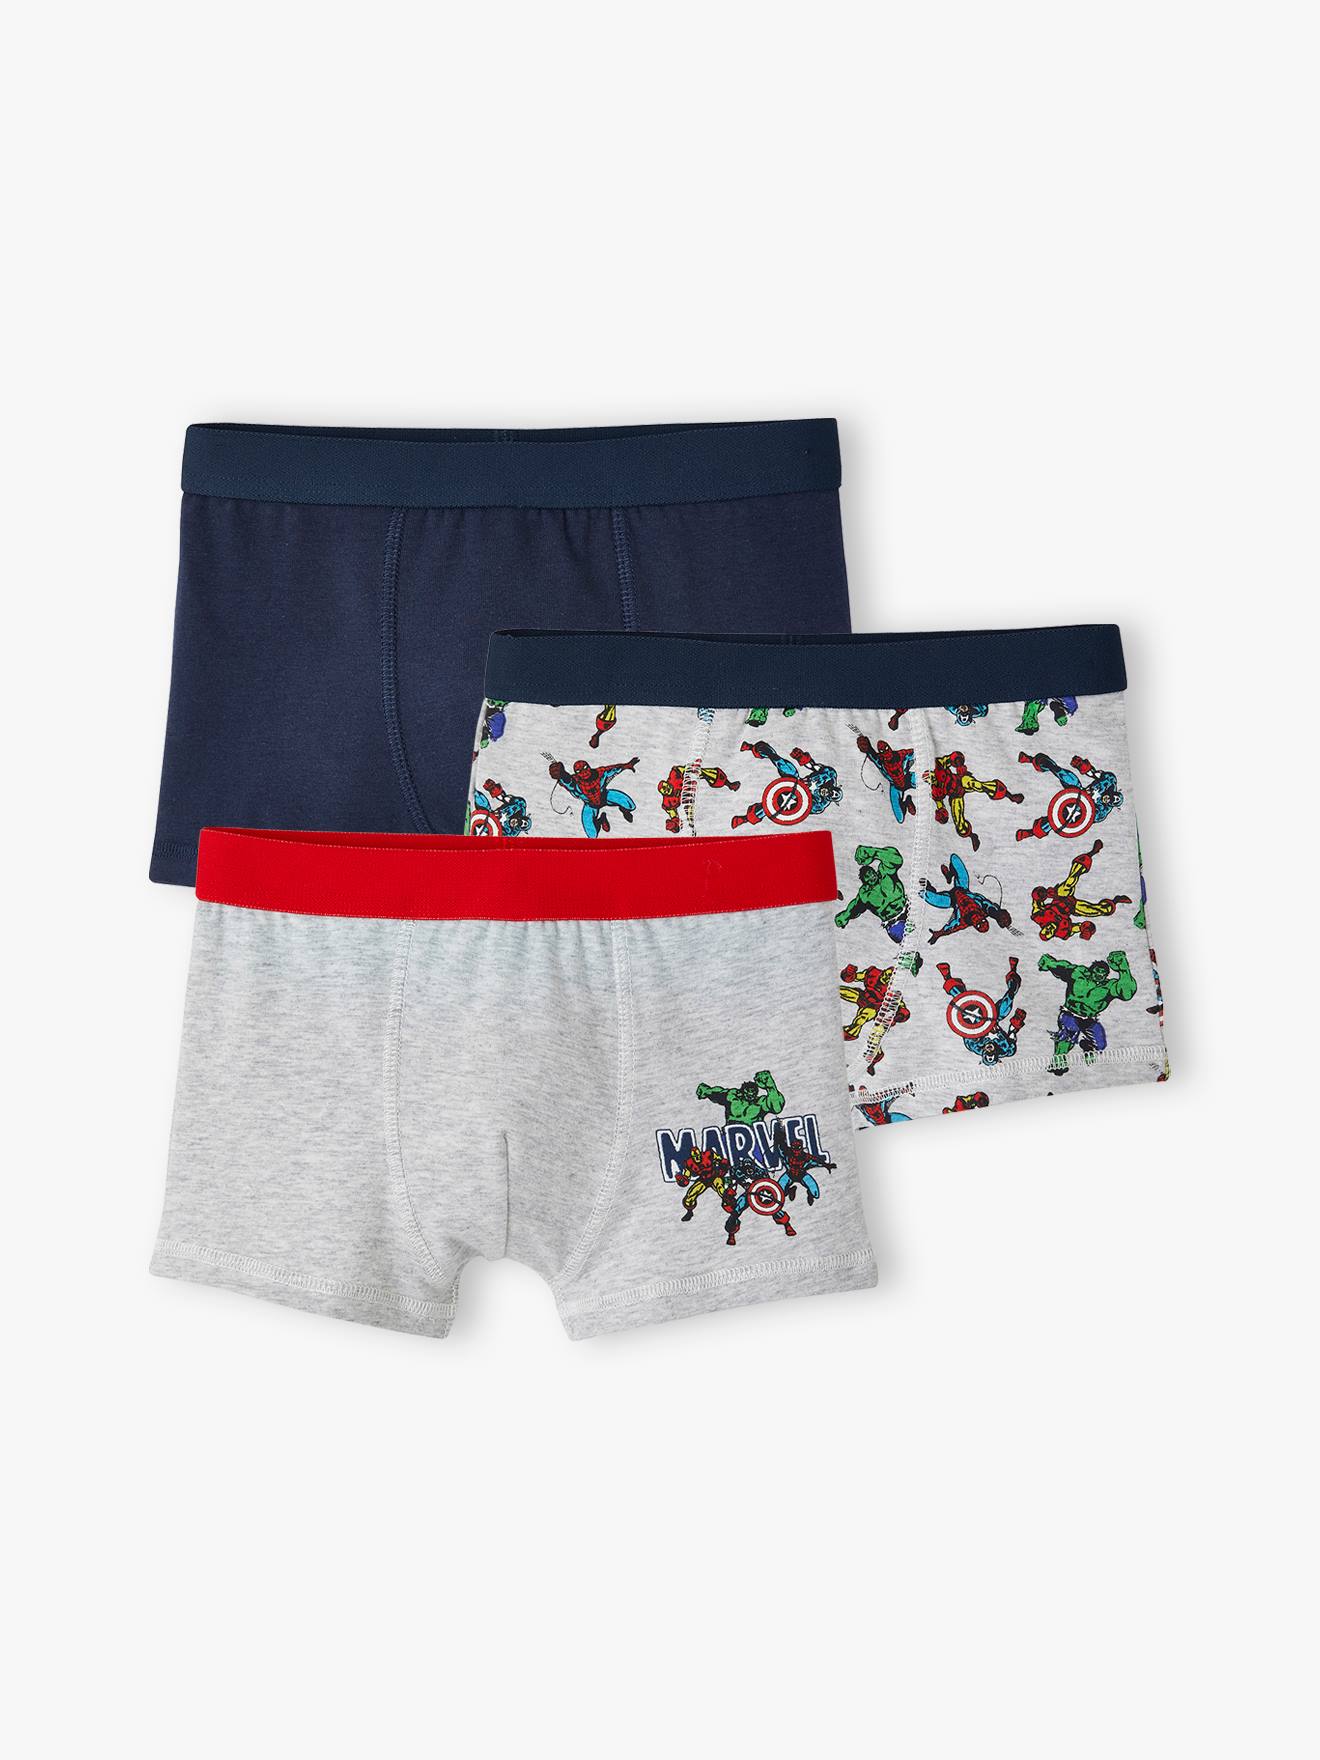 Pack of 3 Avengers Boxers for Boys, by Marvel(r) navy blue